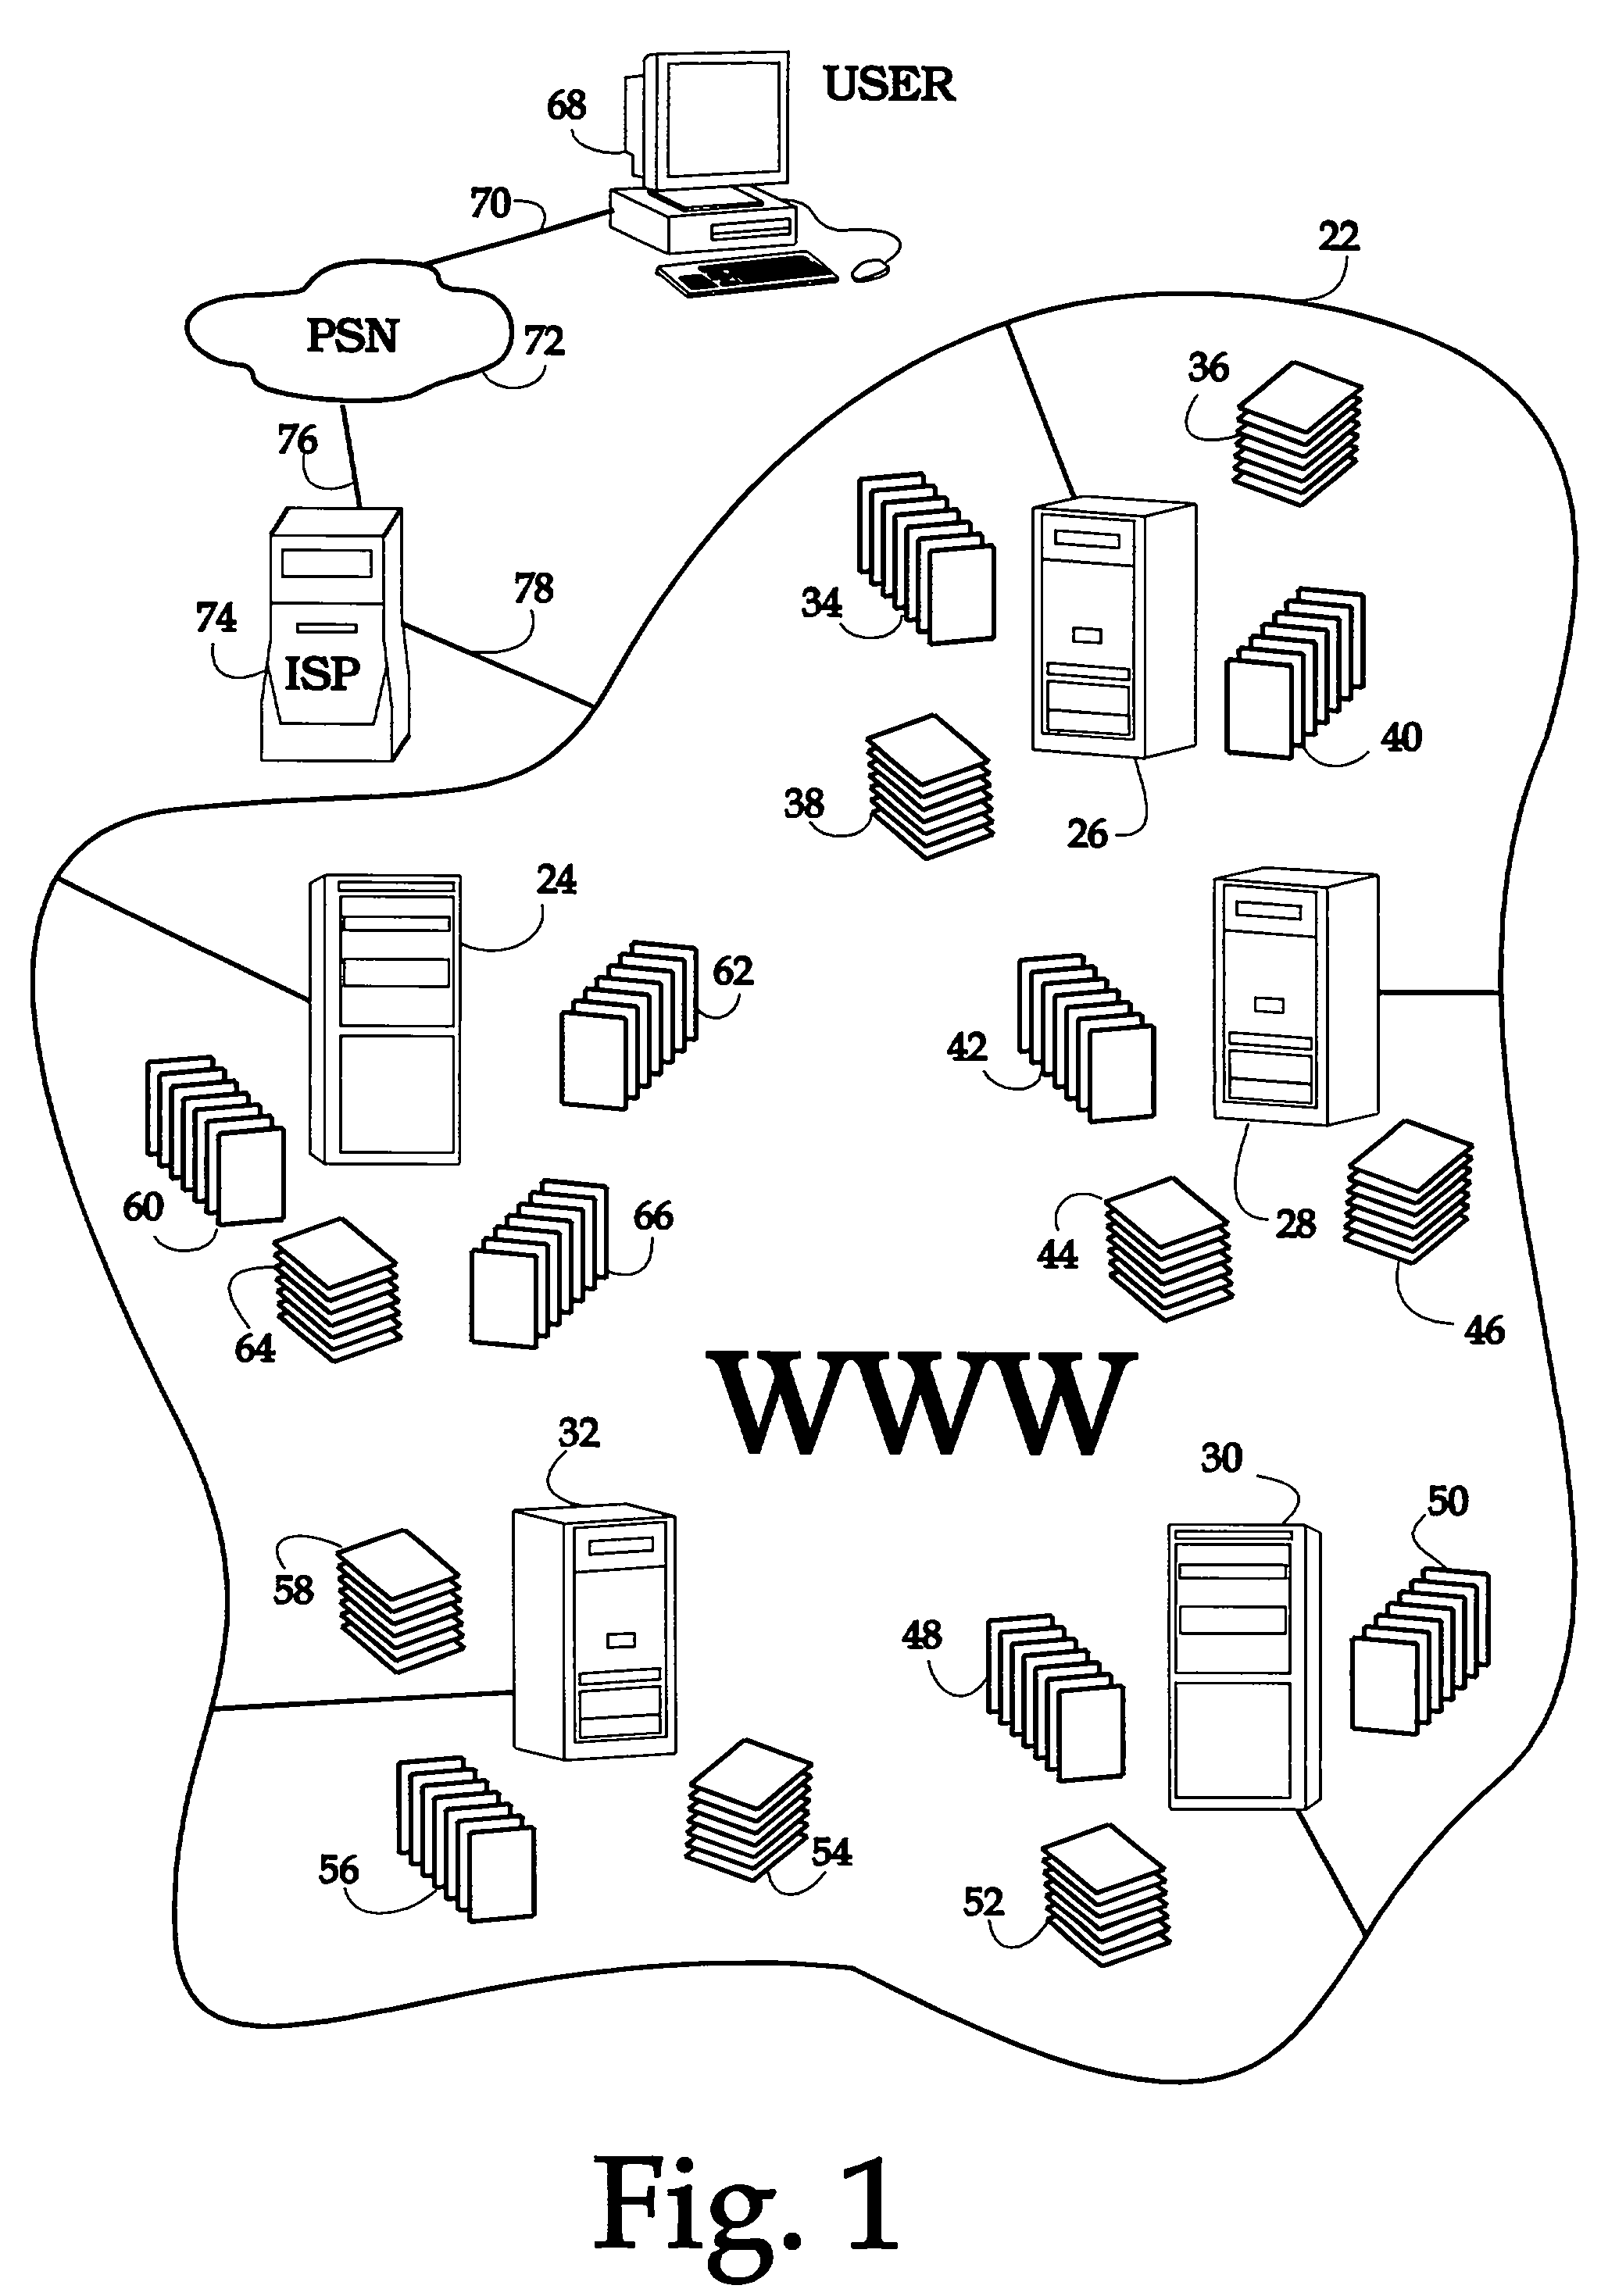 Method for interactively creating an information database including preferred information elements, such as preferred authority, world